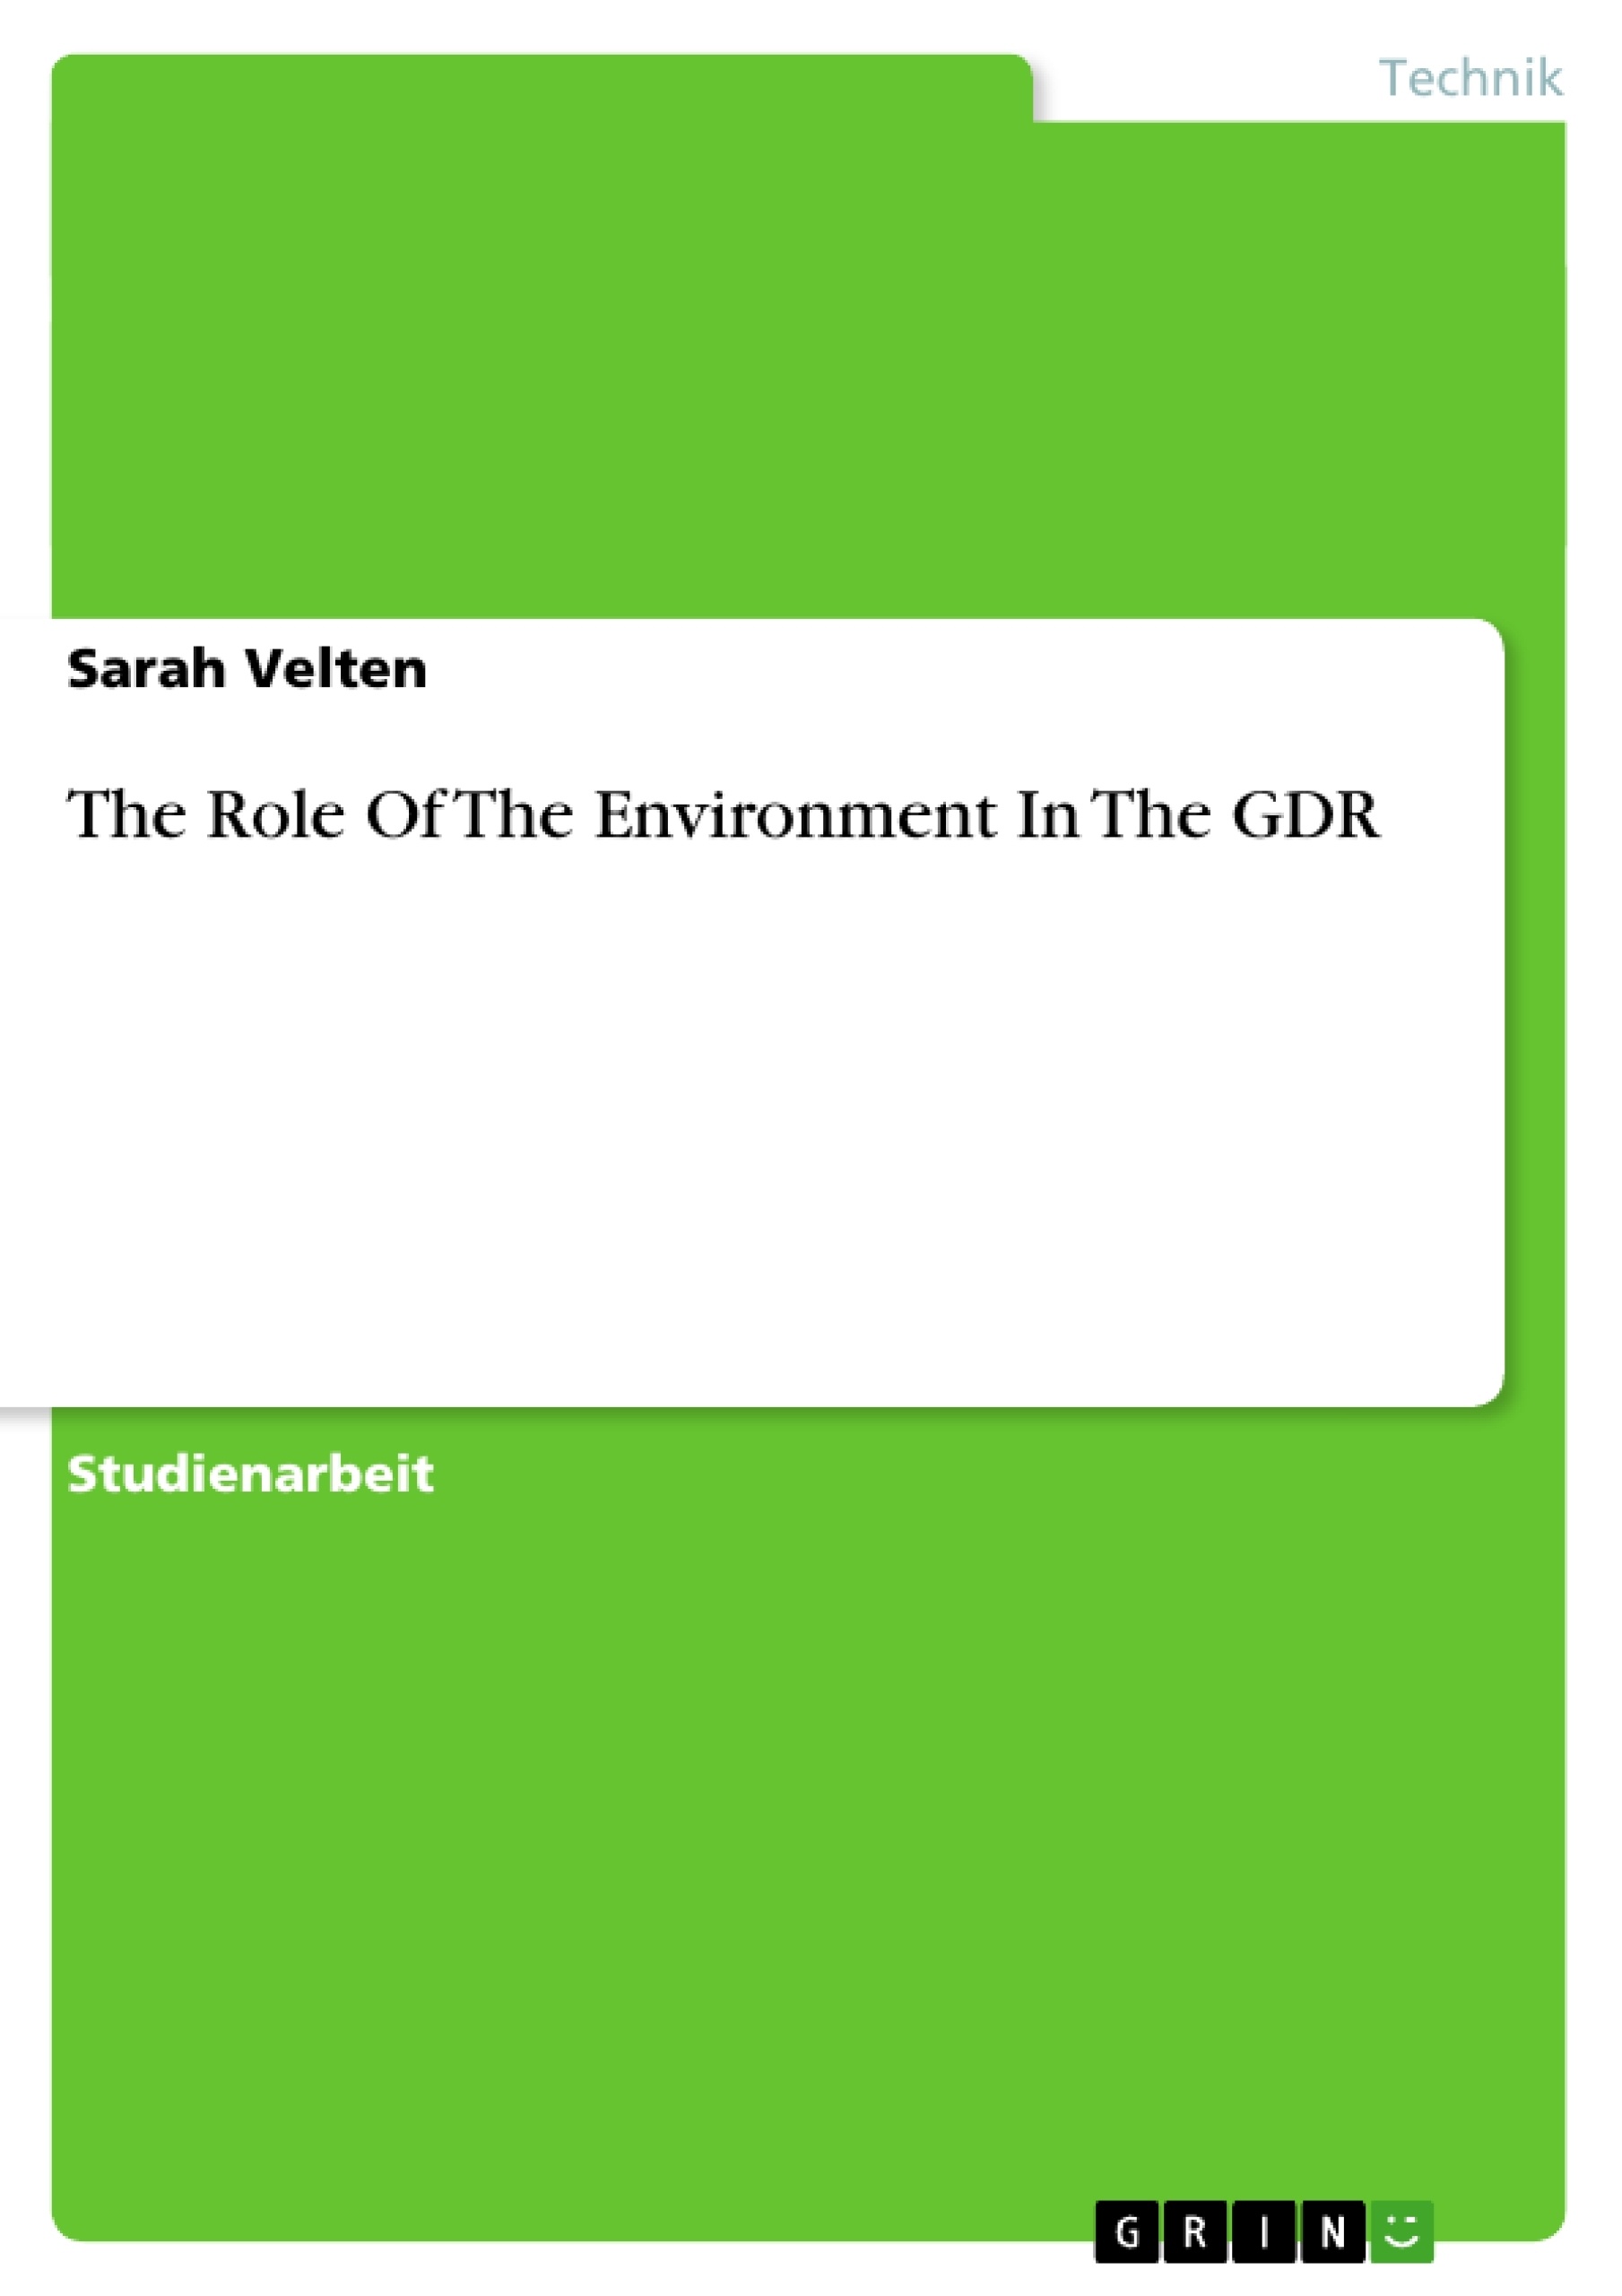 Titel: The Role Of The Environment In The GDR